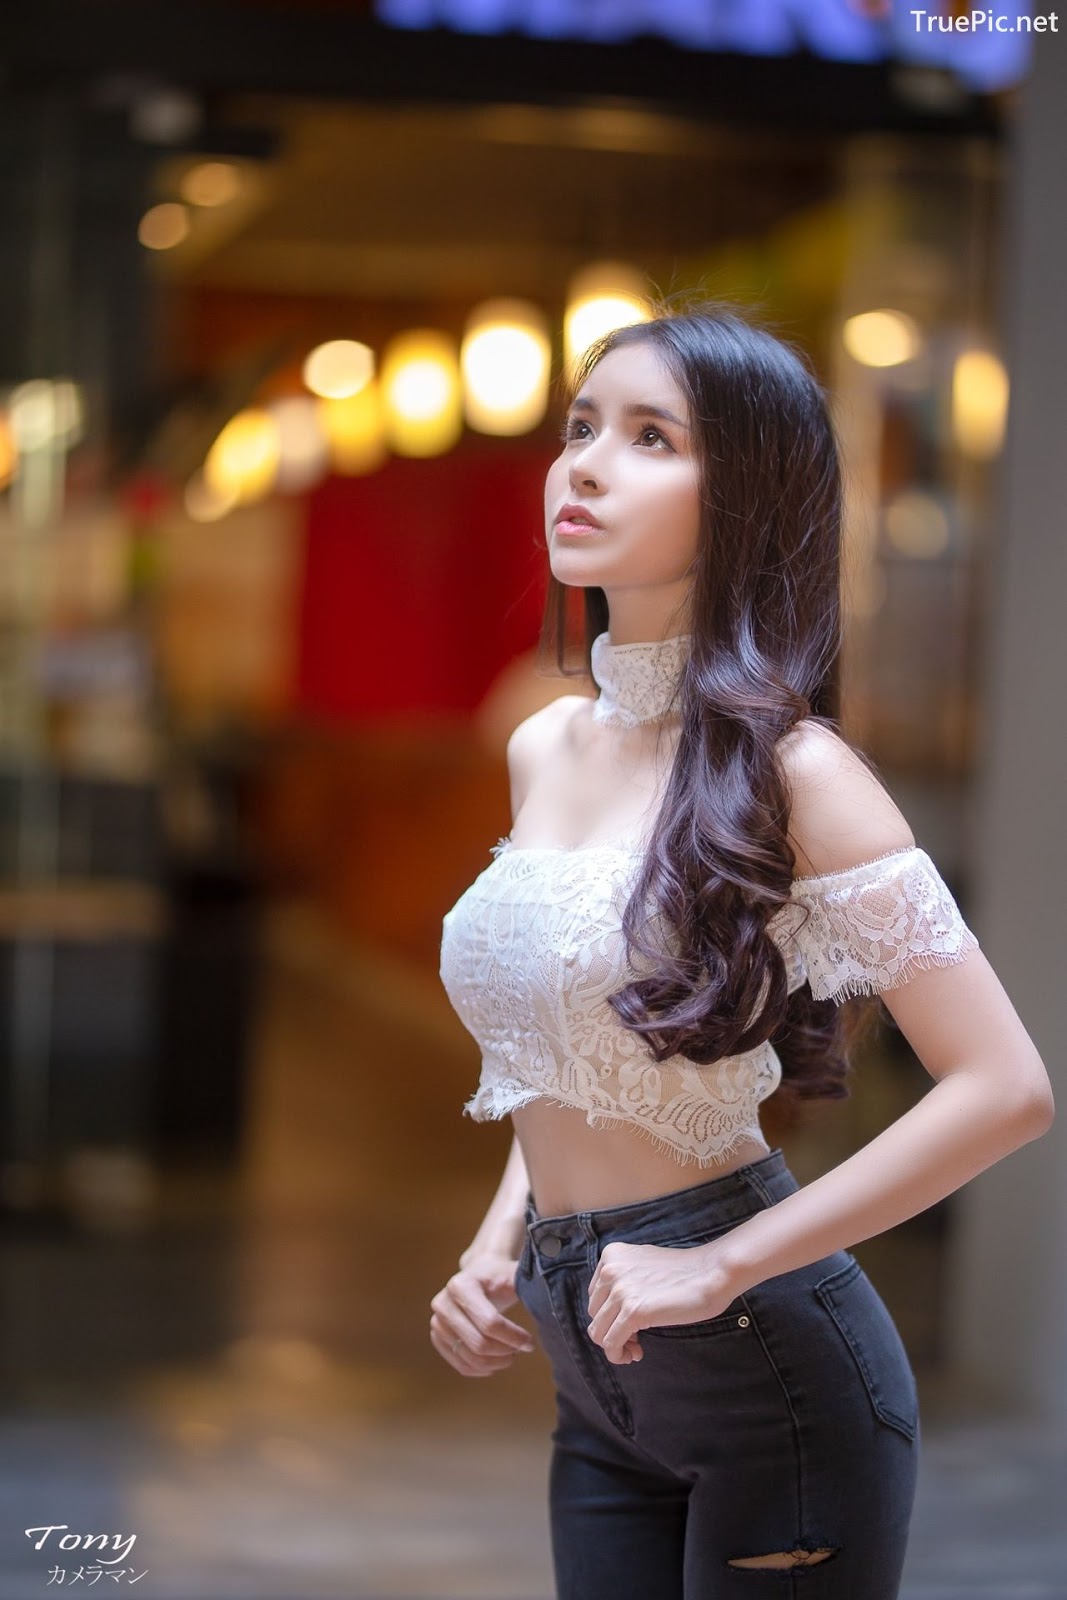 Image-Thailand-Beautiful-Model-Soithip-Palwongpaisal-Transparent-Lace-Crop-Top-And-Jean-TruePic.net- Picture-27